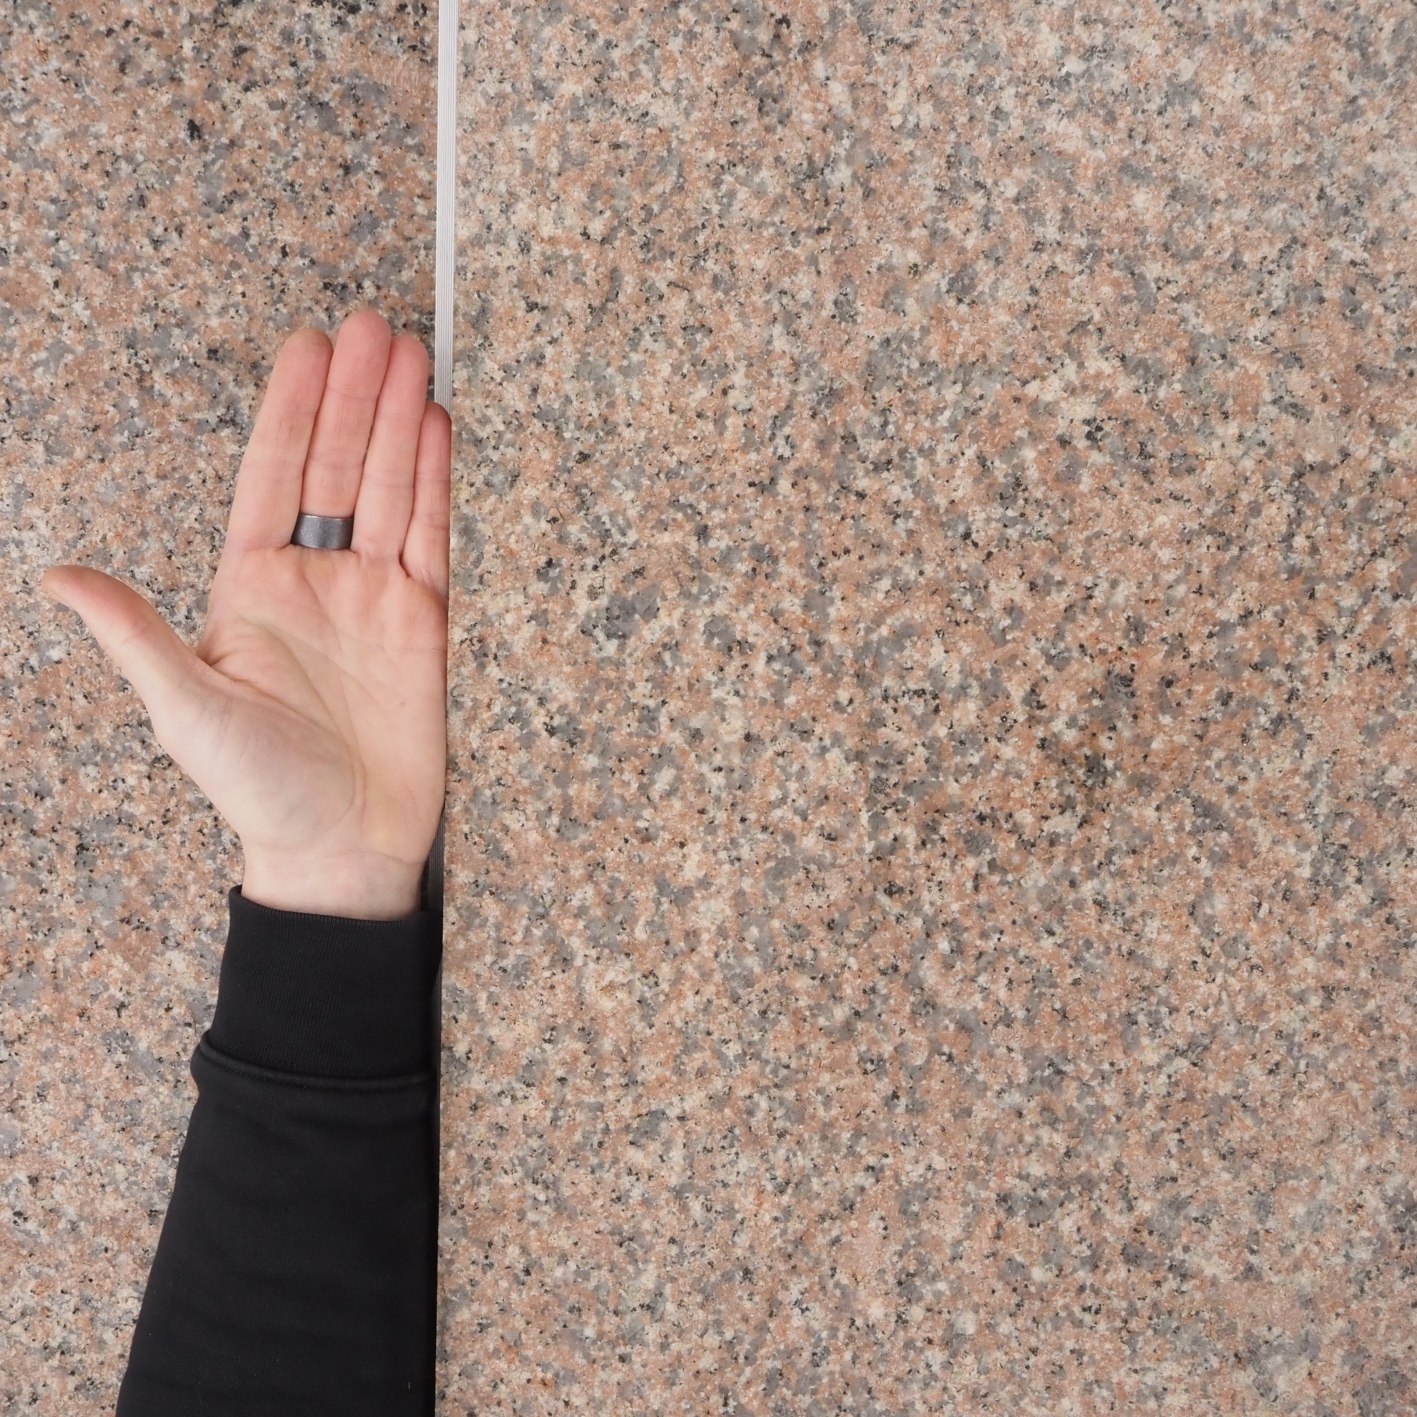 Red granite slabs with flamed finish (B-quality) - Only available in our physical shop